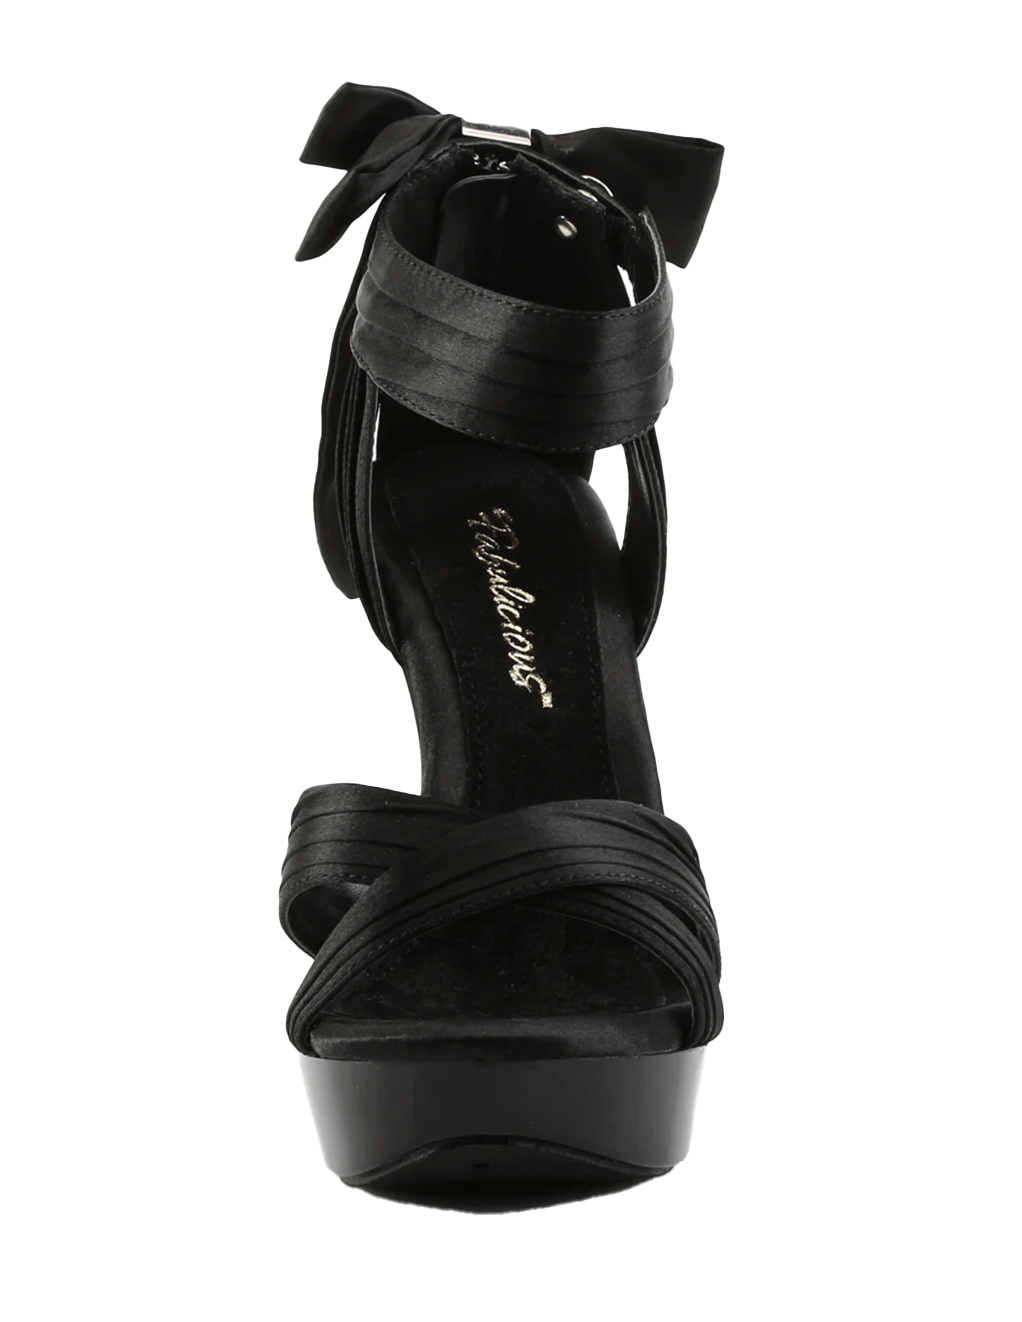 Cocktail-568 Open Toe Heel Sandal With Bow - Black Satin/Black - Front